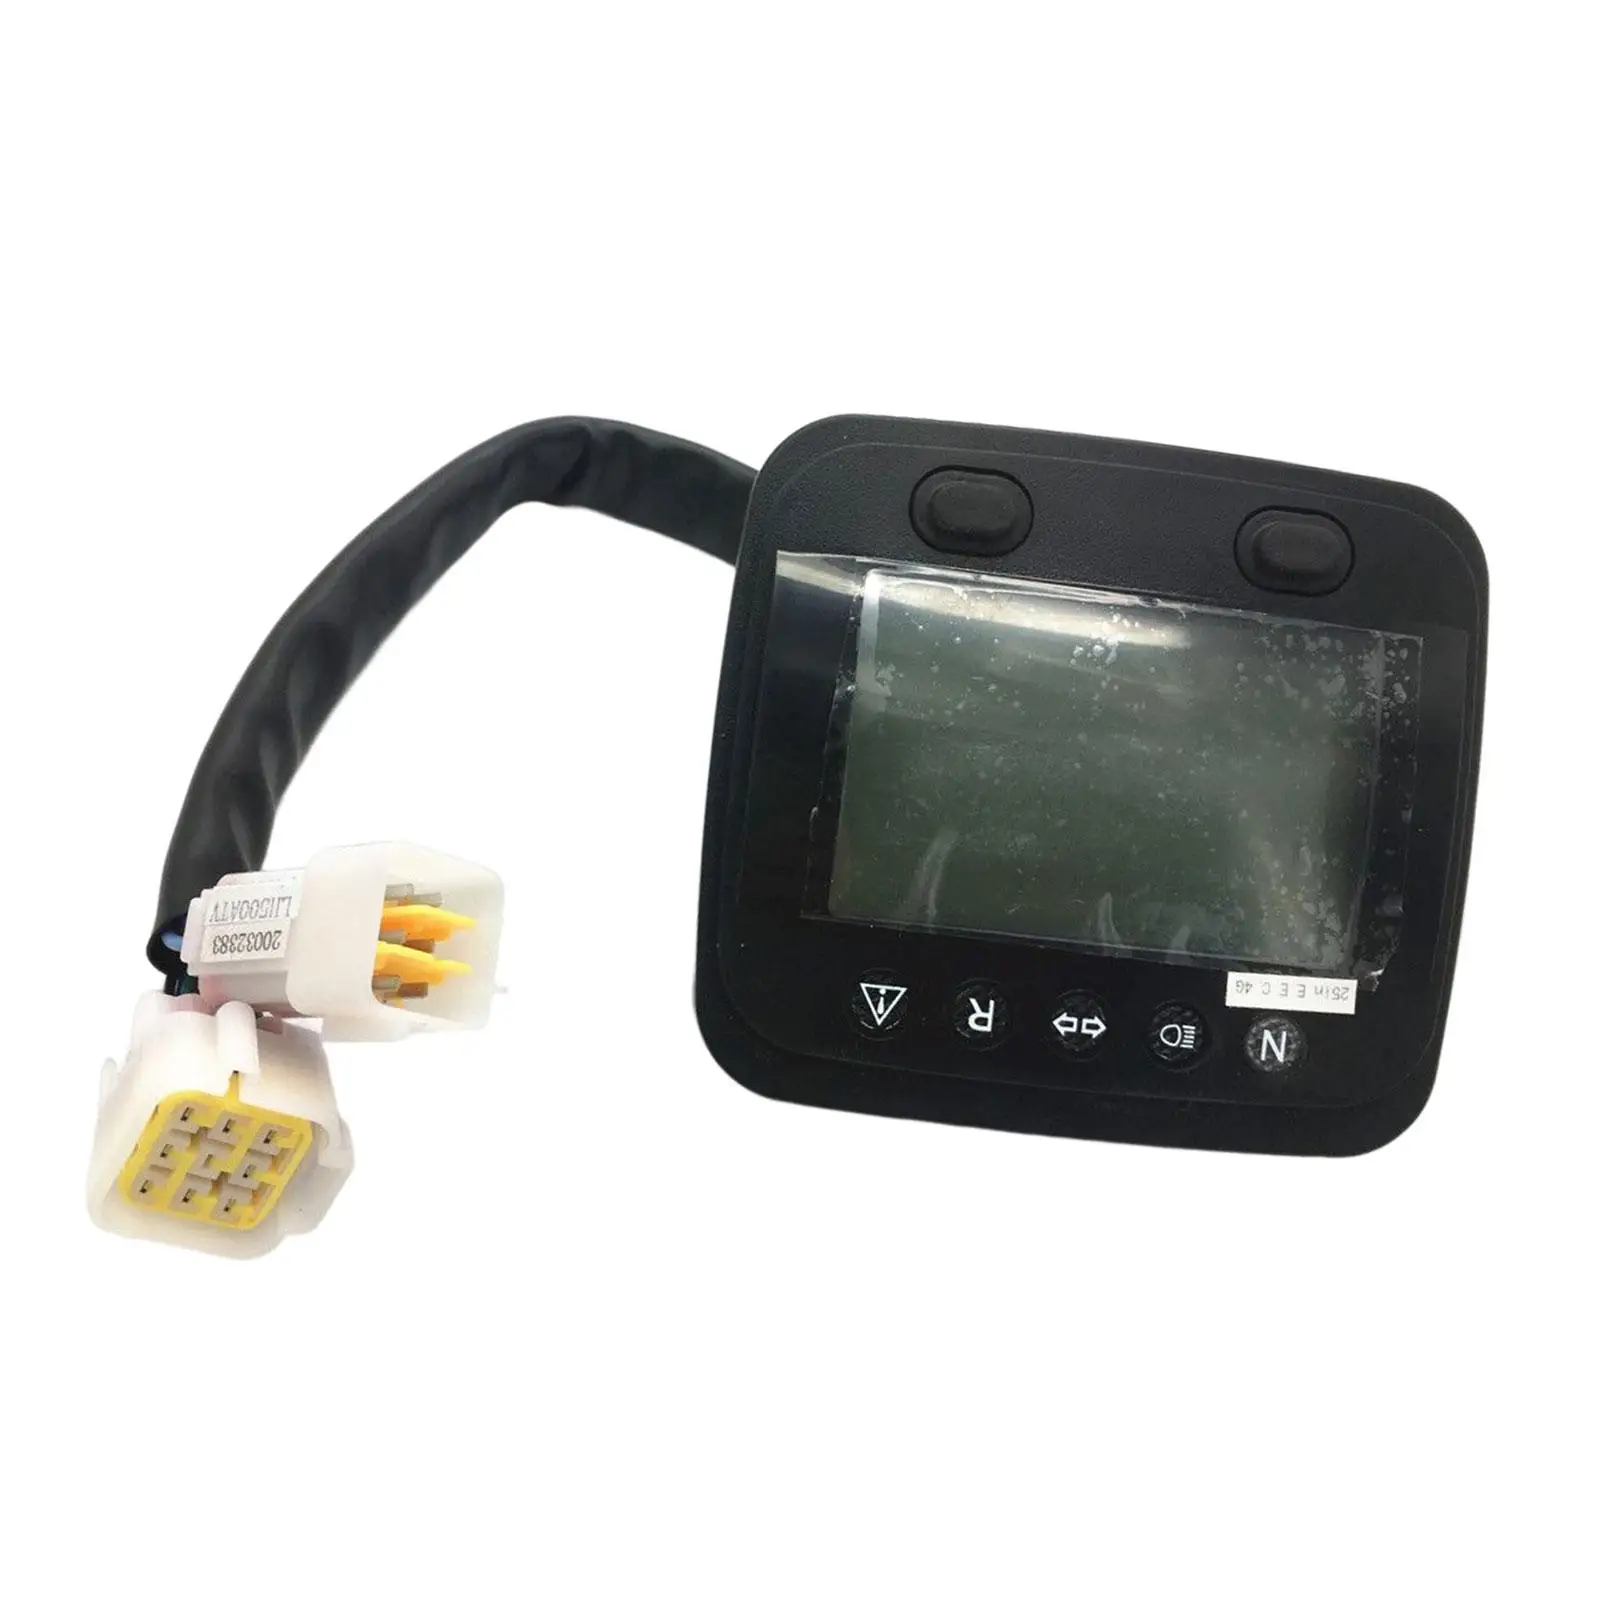 LCD Speedometer Meter Installation Required Sturdy Equipment Repair Parts Good Performance Motorcycle Gauge for 500cc ATV